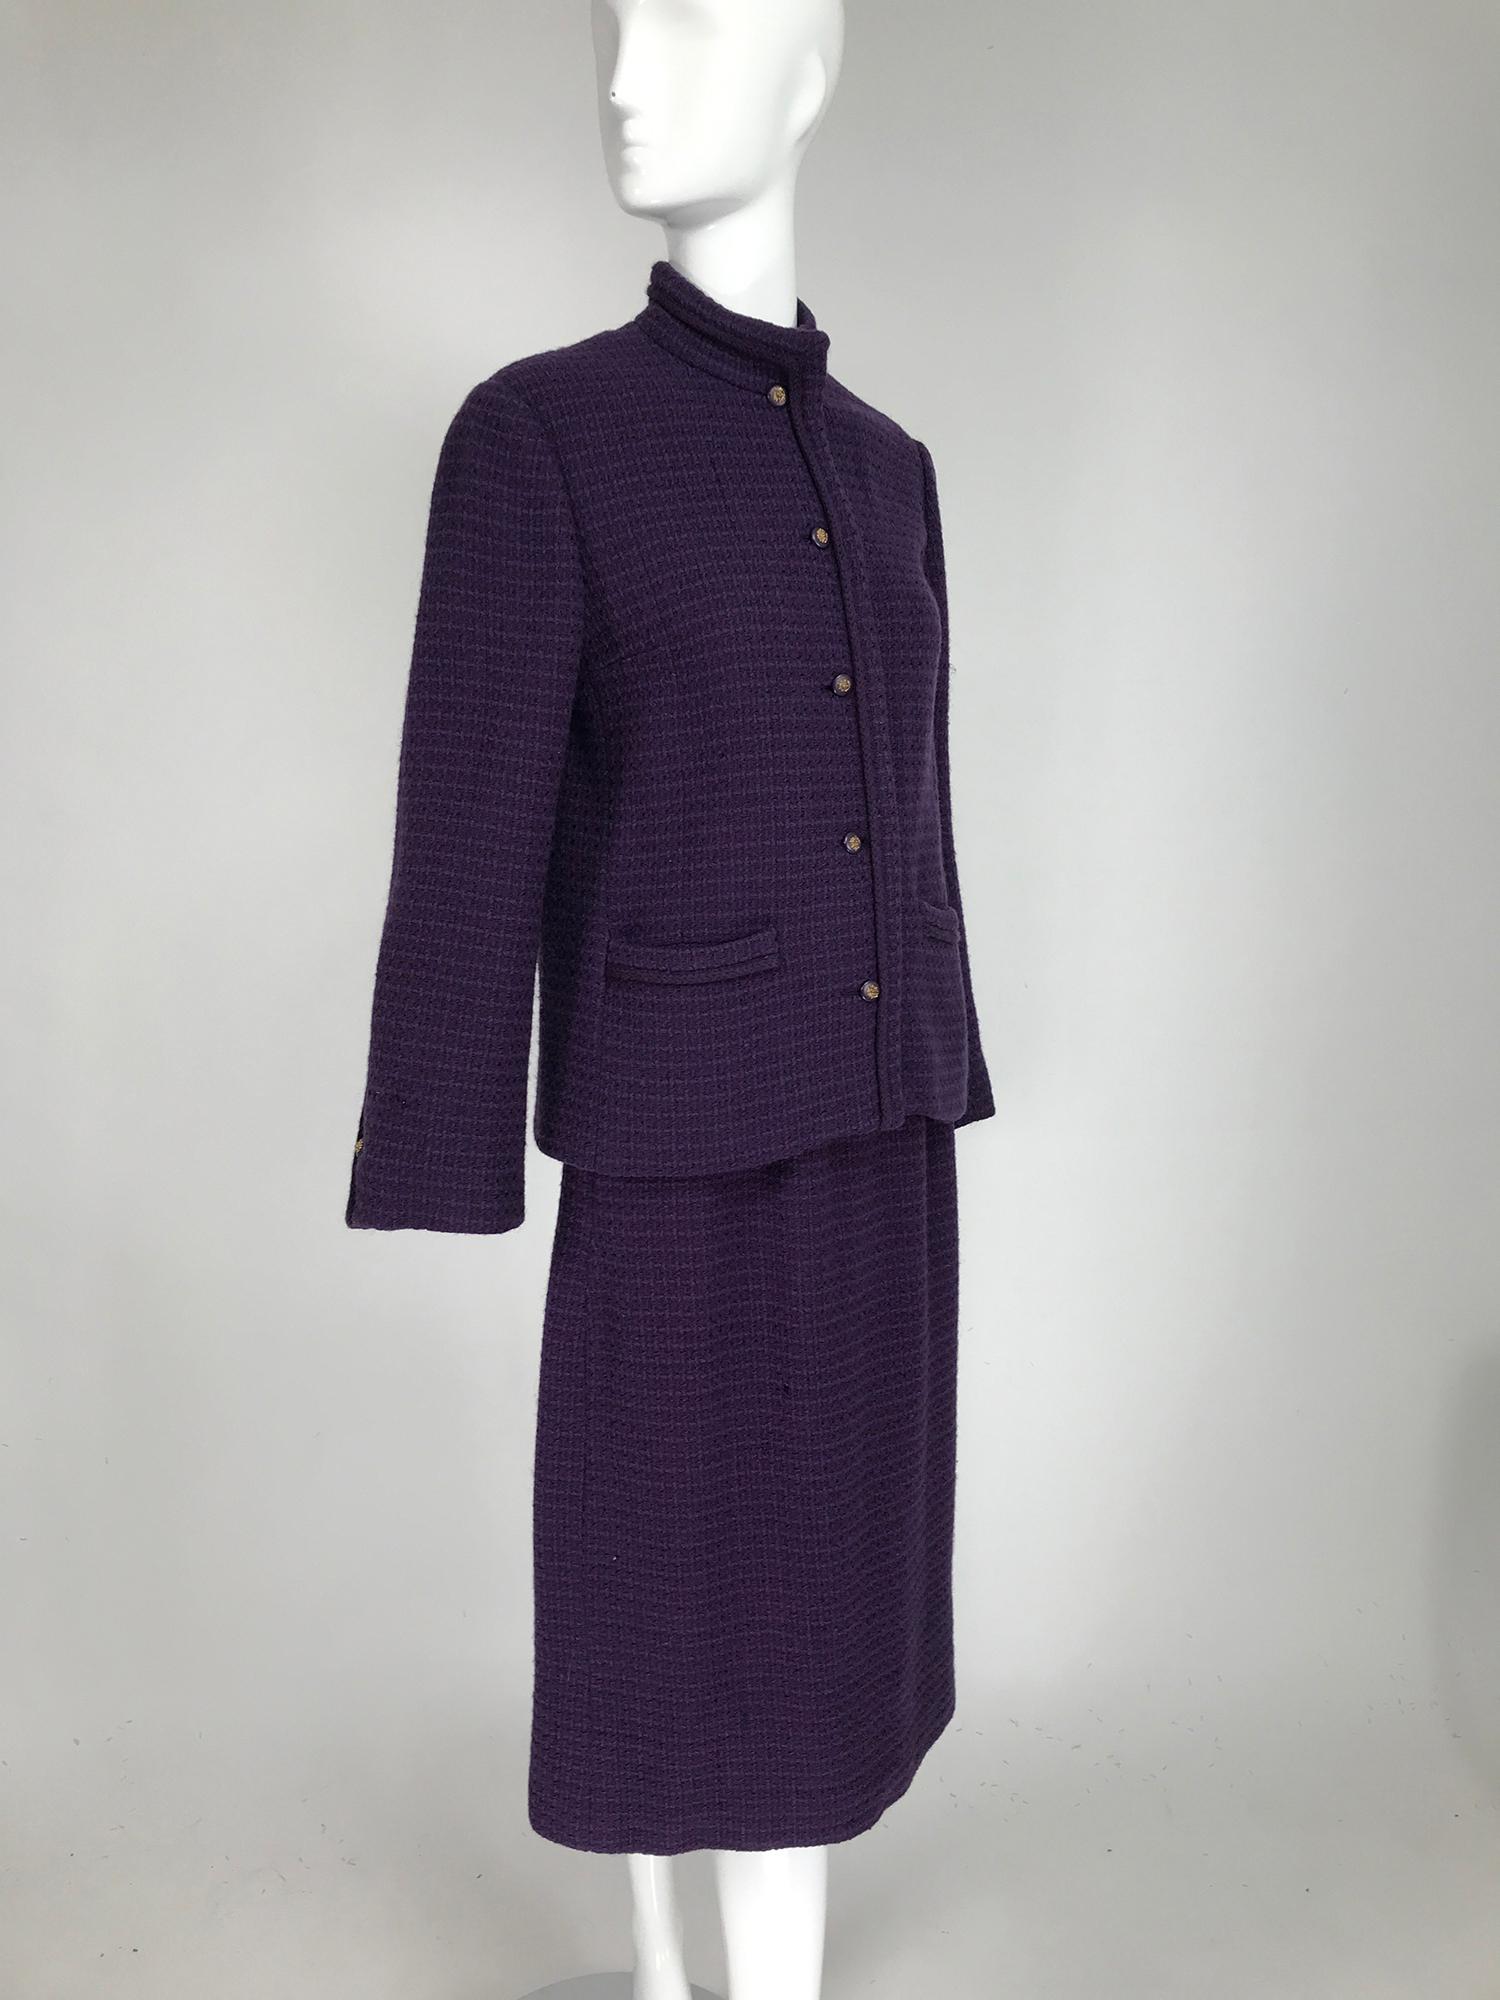 Vintage Chanel Creations purple wool skirt suit with purple & gold lion head buttons at the front & cuffs, gold chain hem in the lining. Mid weight waffle textured wool jacket, with band collar, princess seams, single button front, long sleeves have